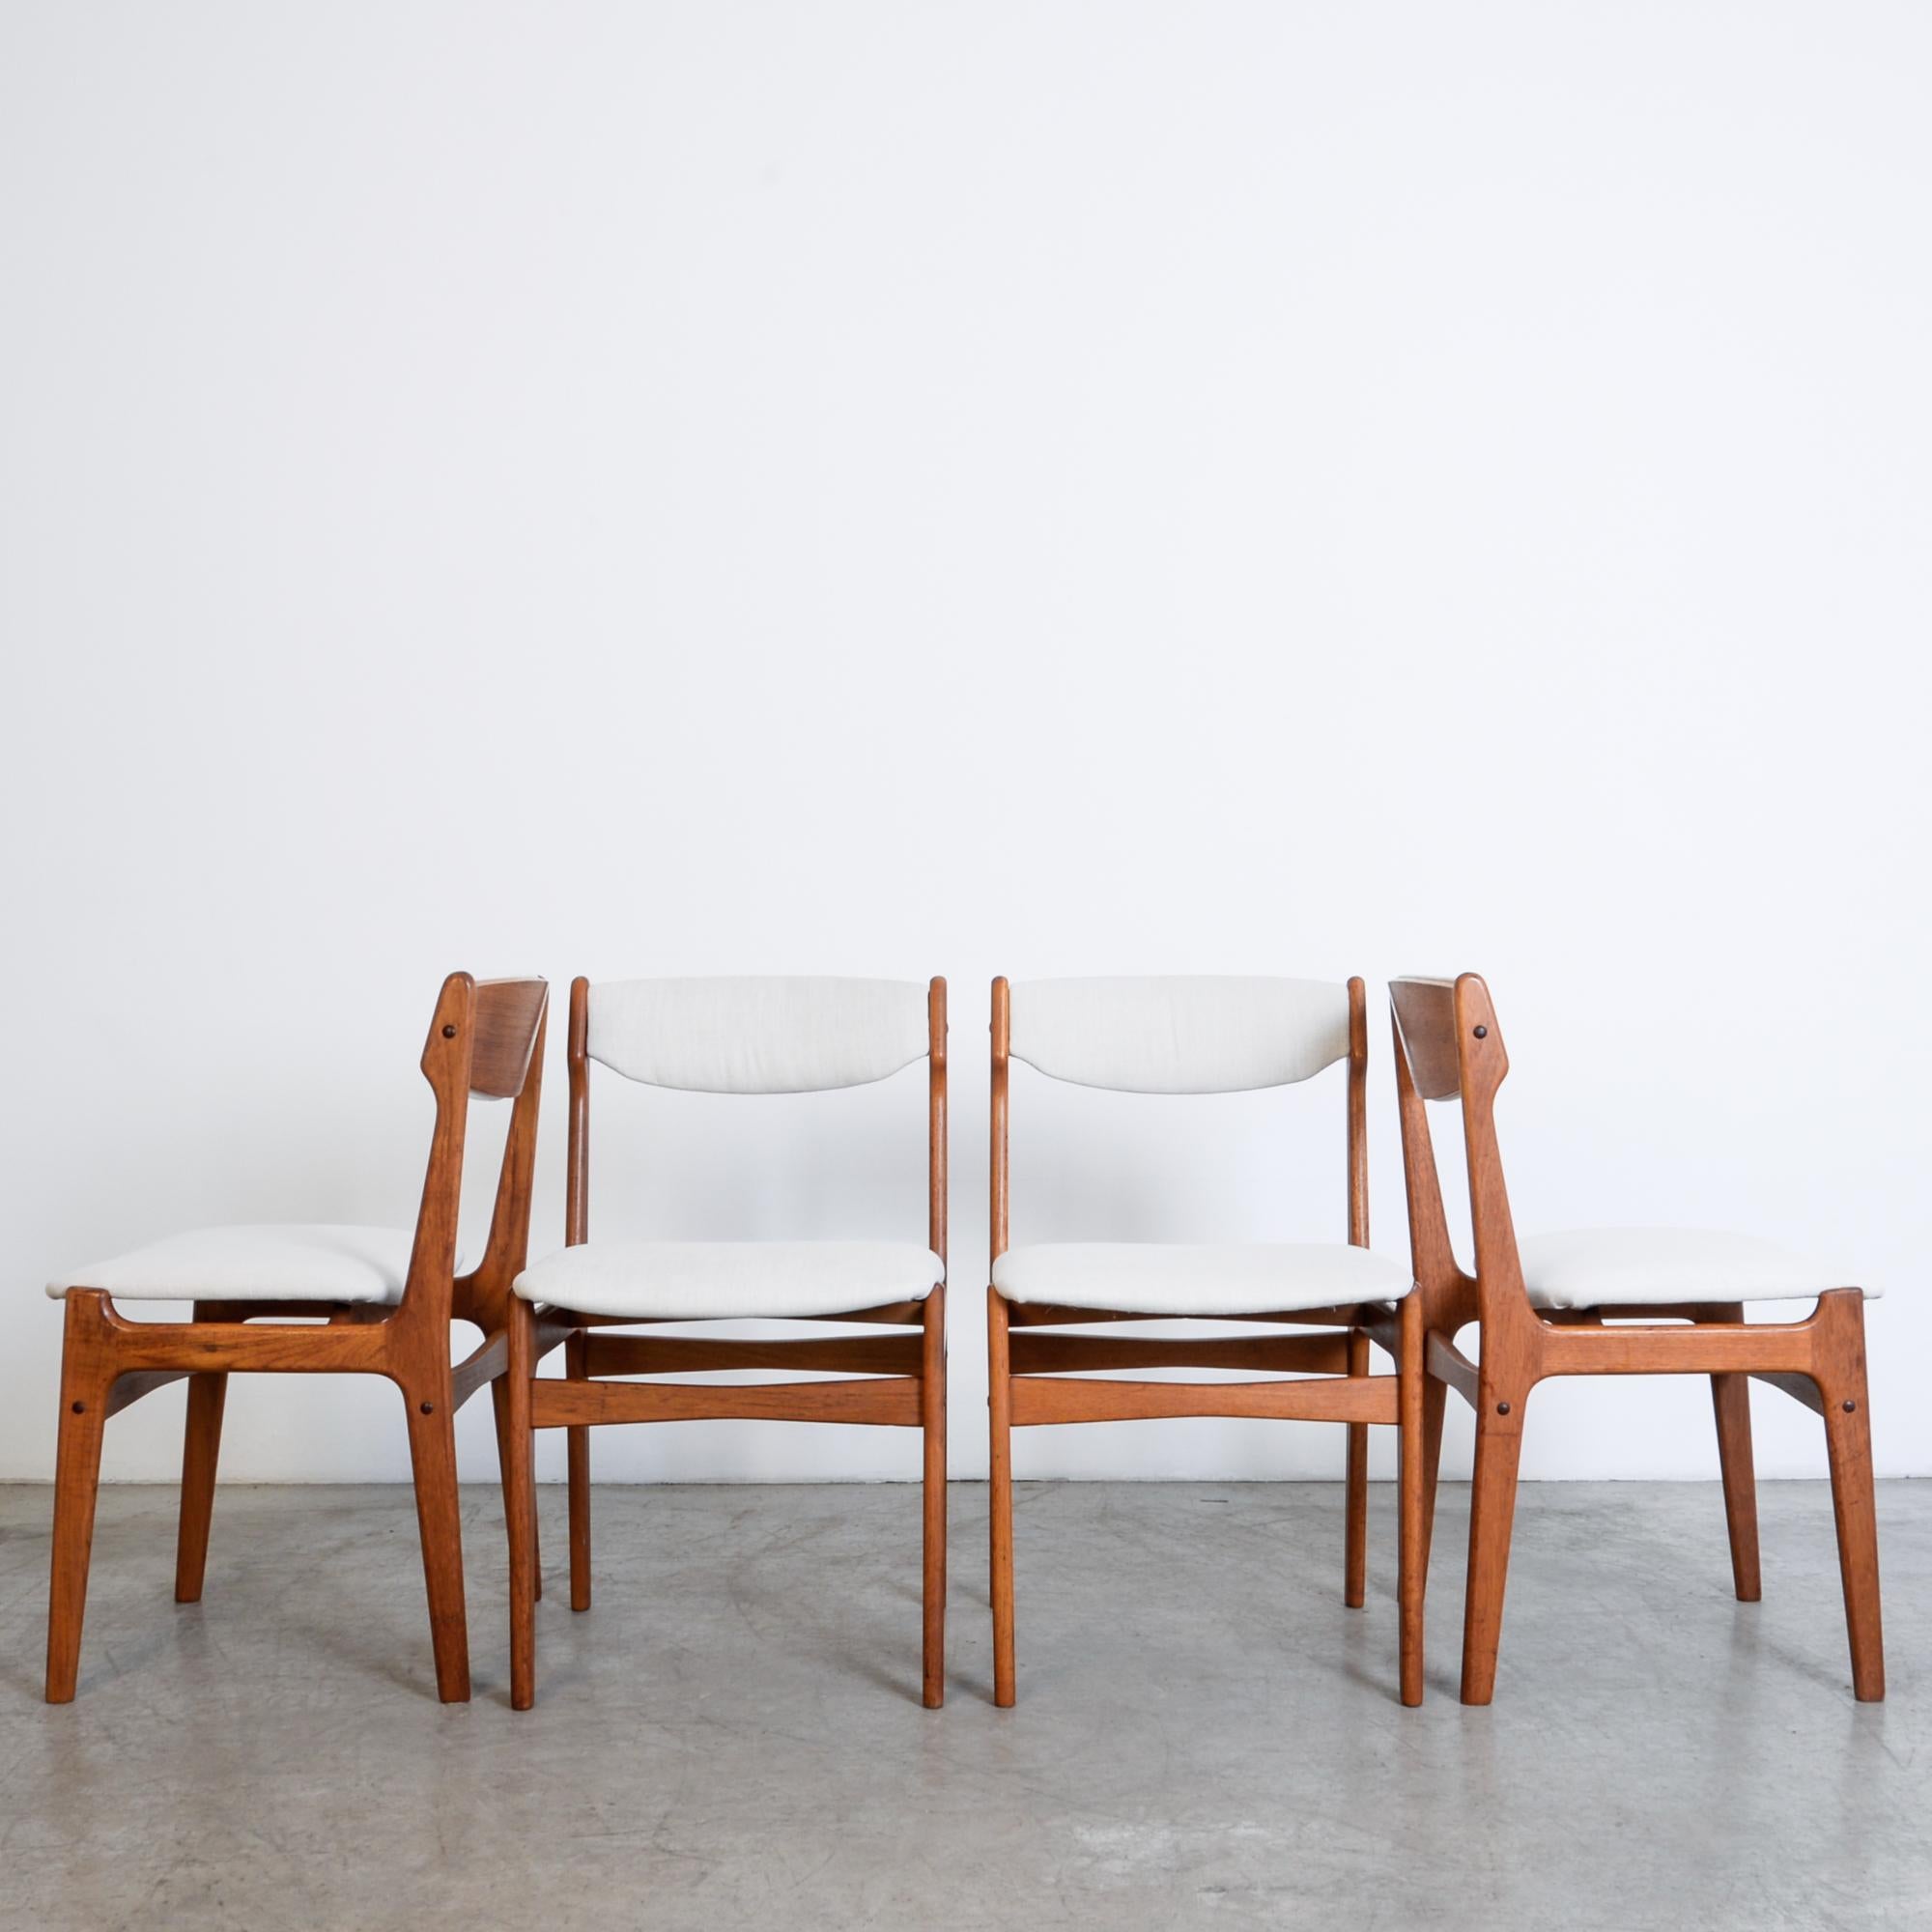 From France, circa 1960, a set of four upholstered dining chairs in teak. Influenced by the contemporary fashion of Modern design, these chairs are composed by simplified geometric forms, with organic variations reflecting the distinctive contours